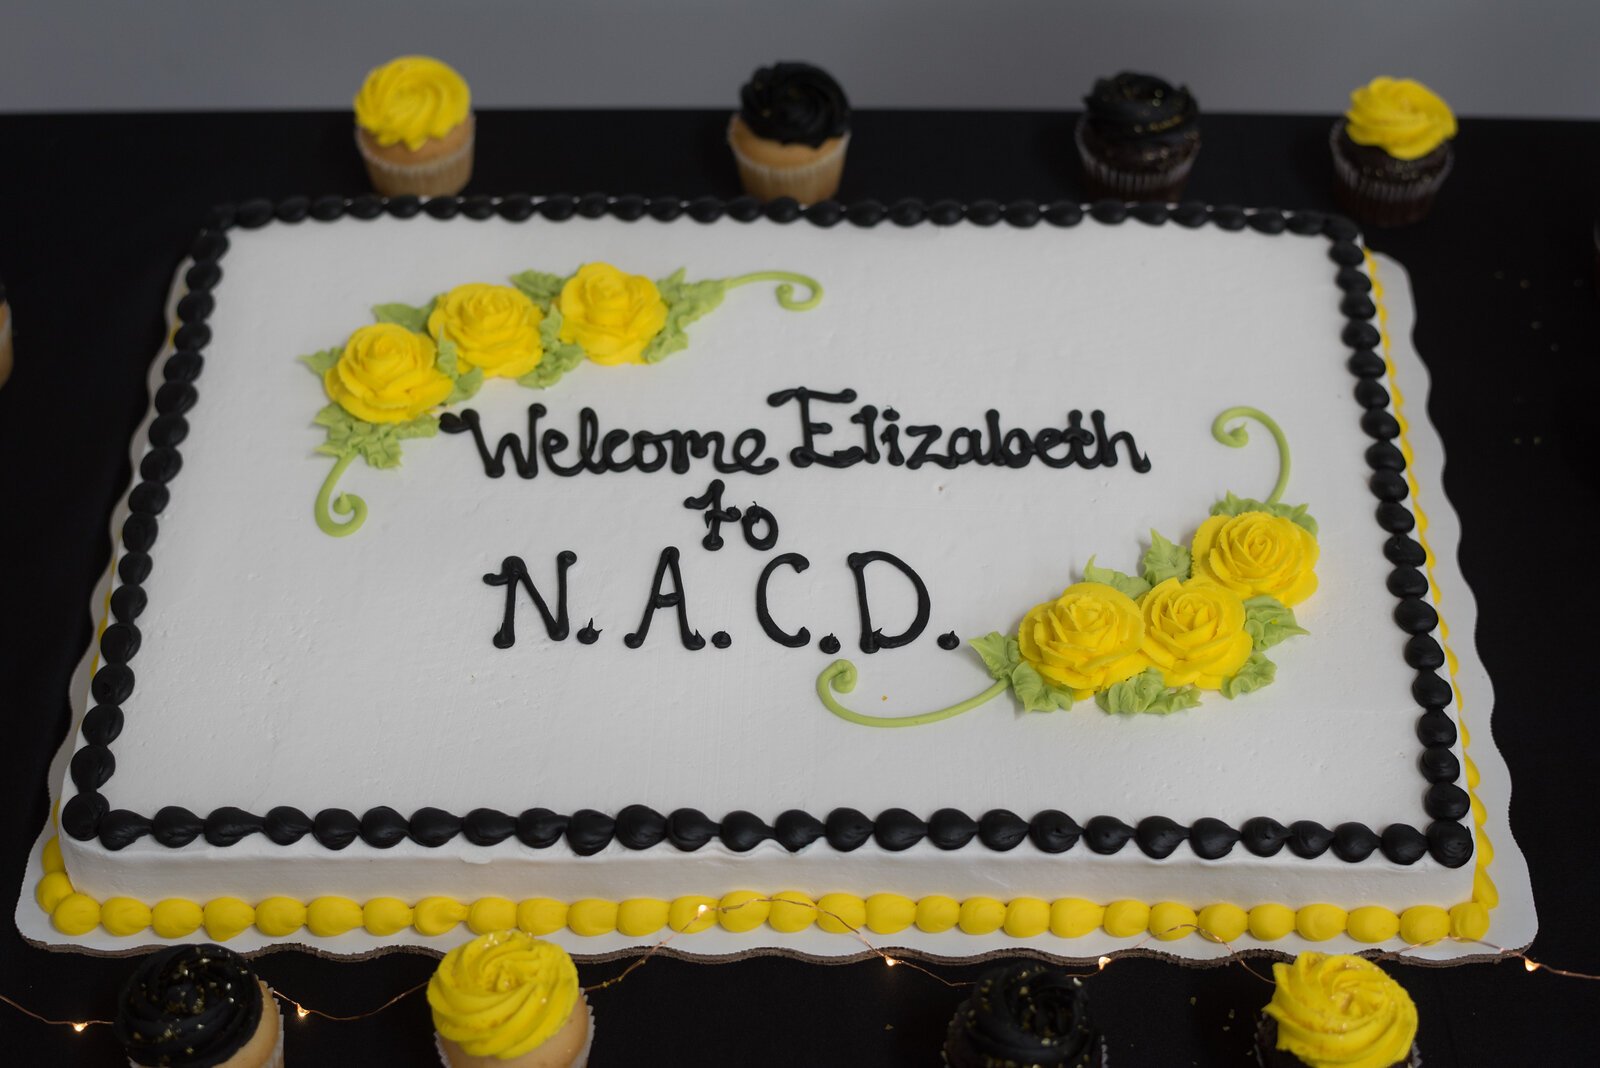 Over 300 people showed up to the NACD Open House to welcome Elizabeth Washington as the new NACD Director.